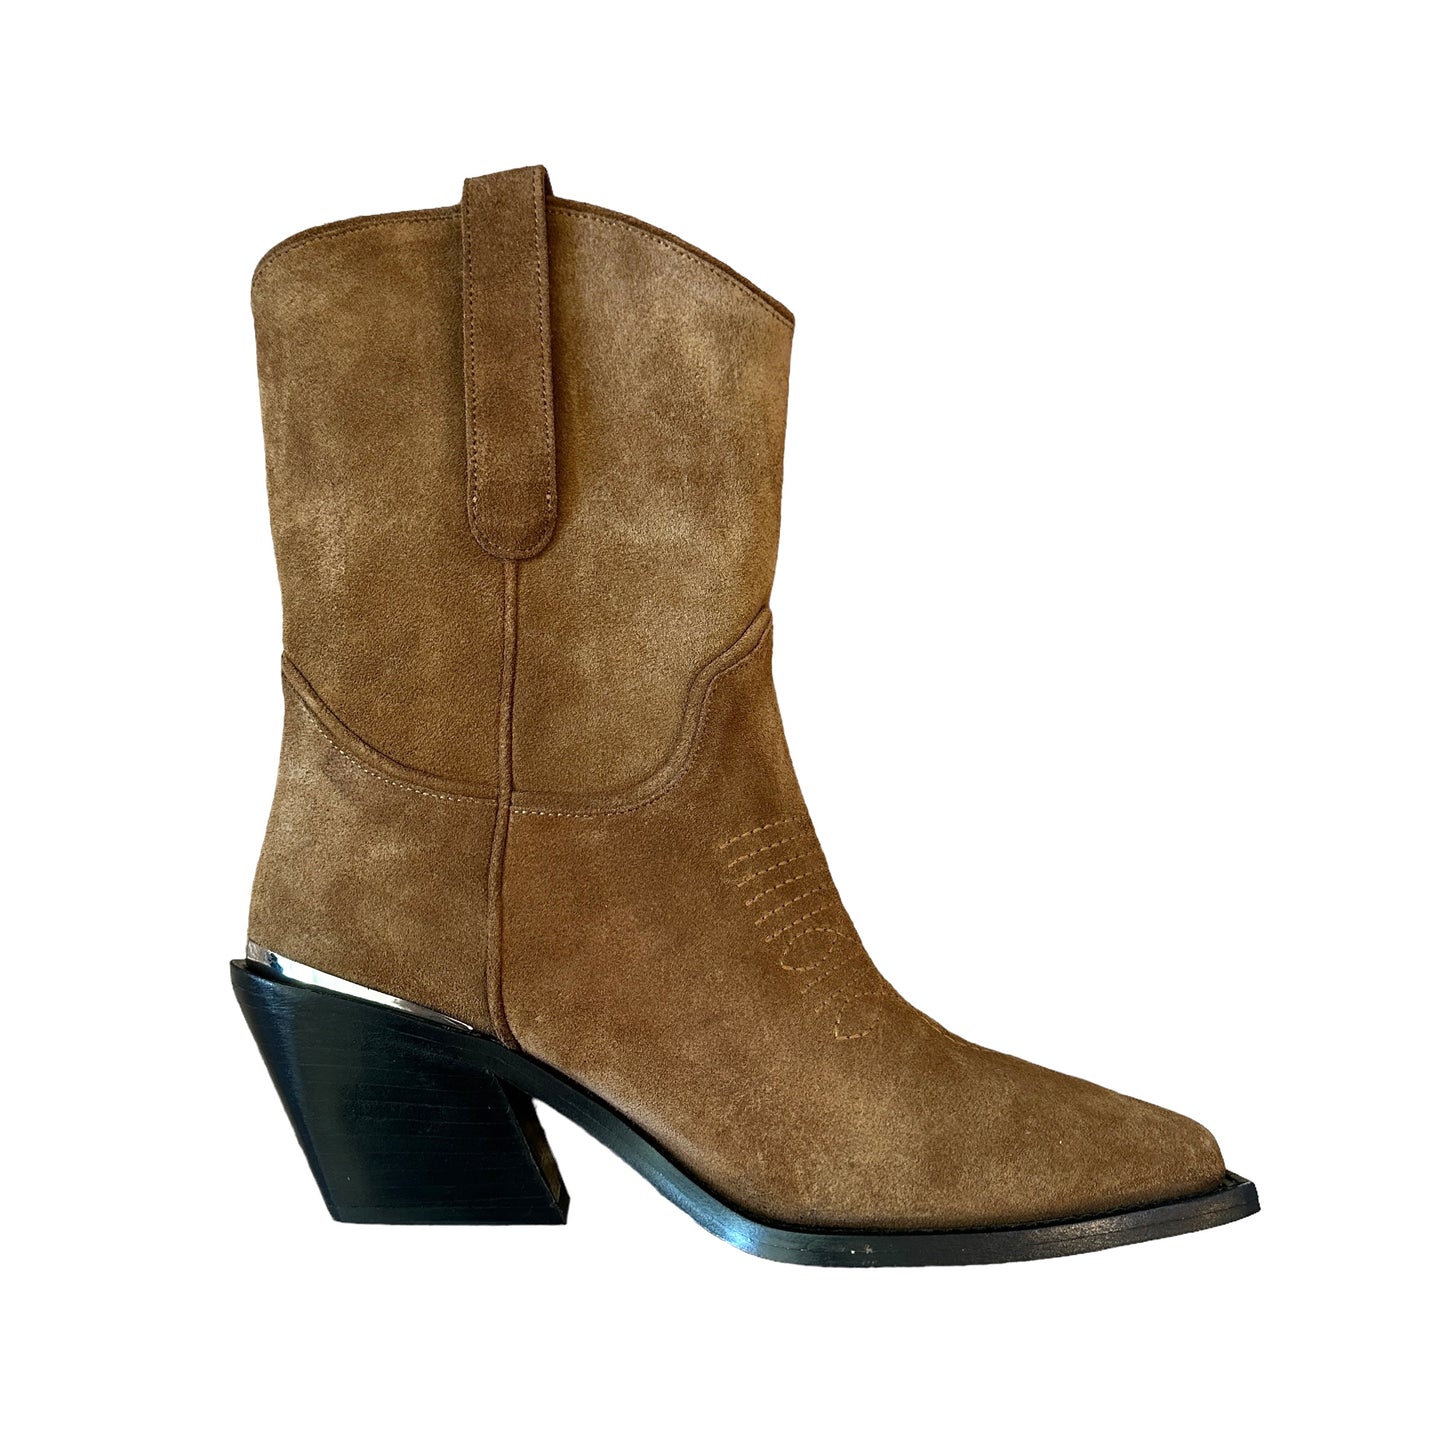 Taupe Suede Cowboy Boots - 7